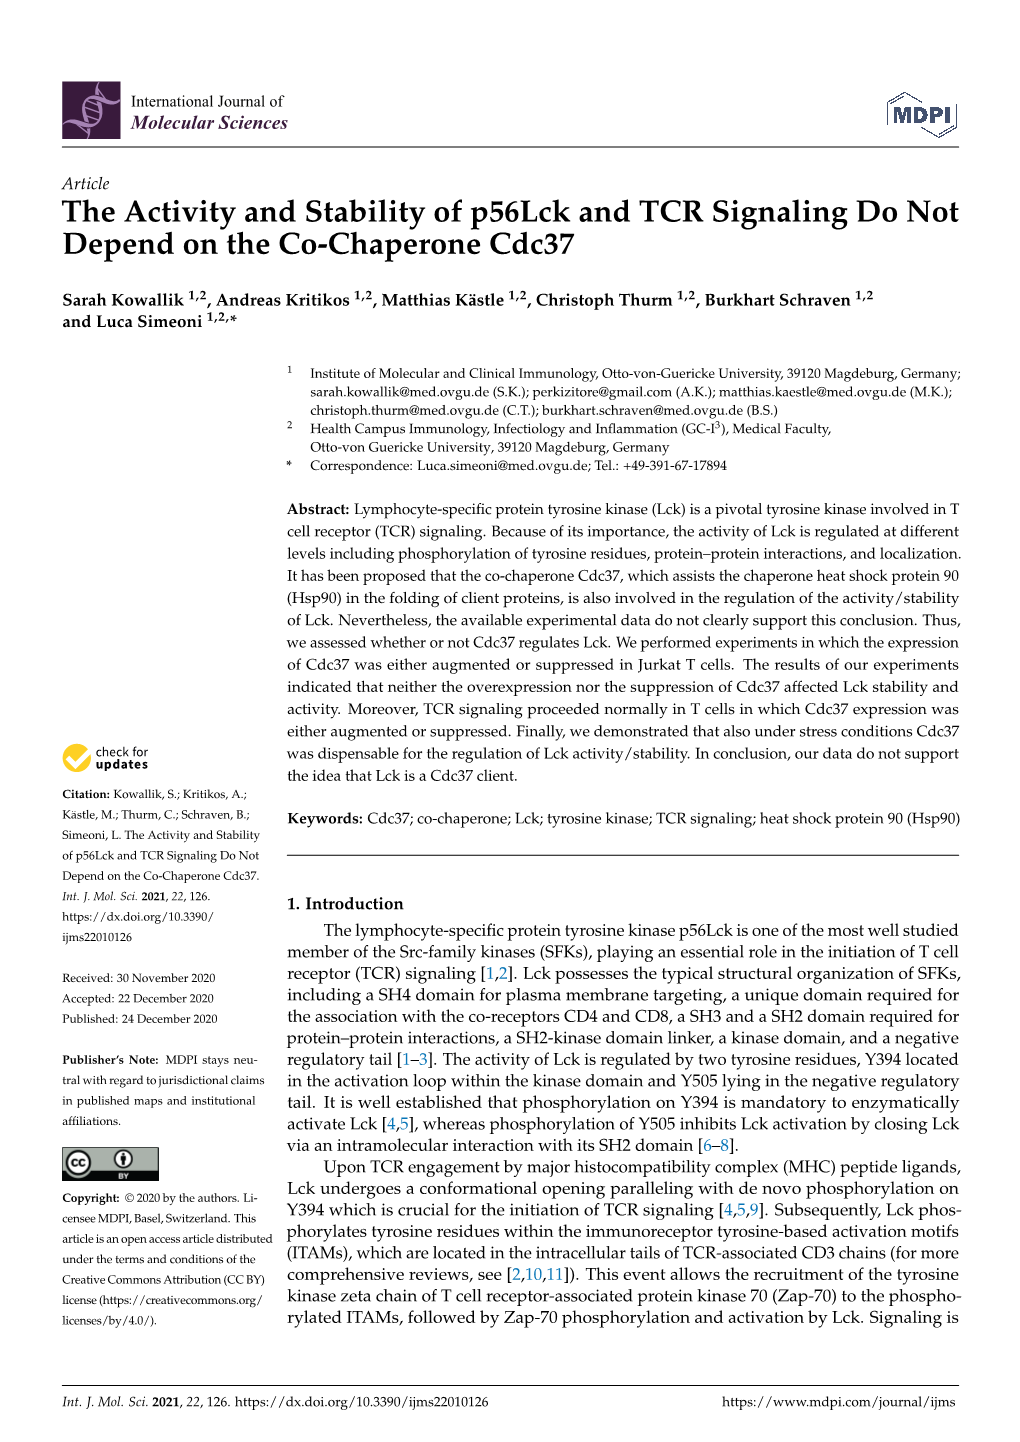 The Activity and Stability of P56lck and TCR Signaling Do Not Depend on the Co-Chaperone Cdc37